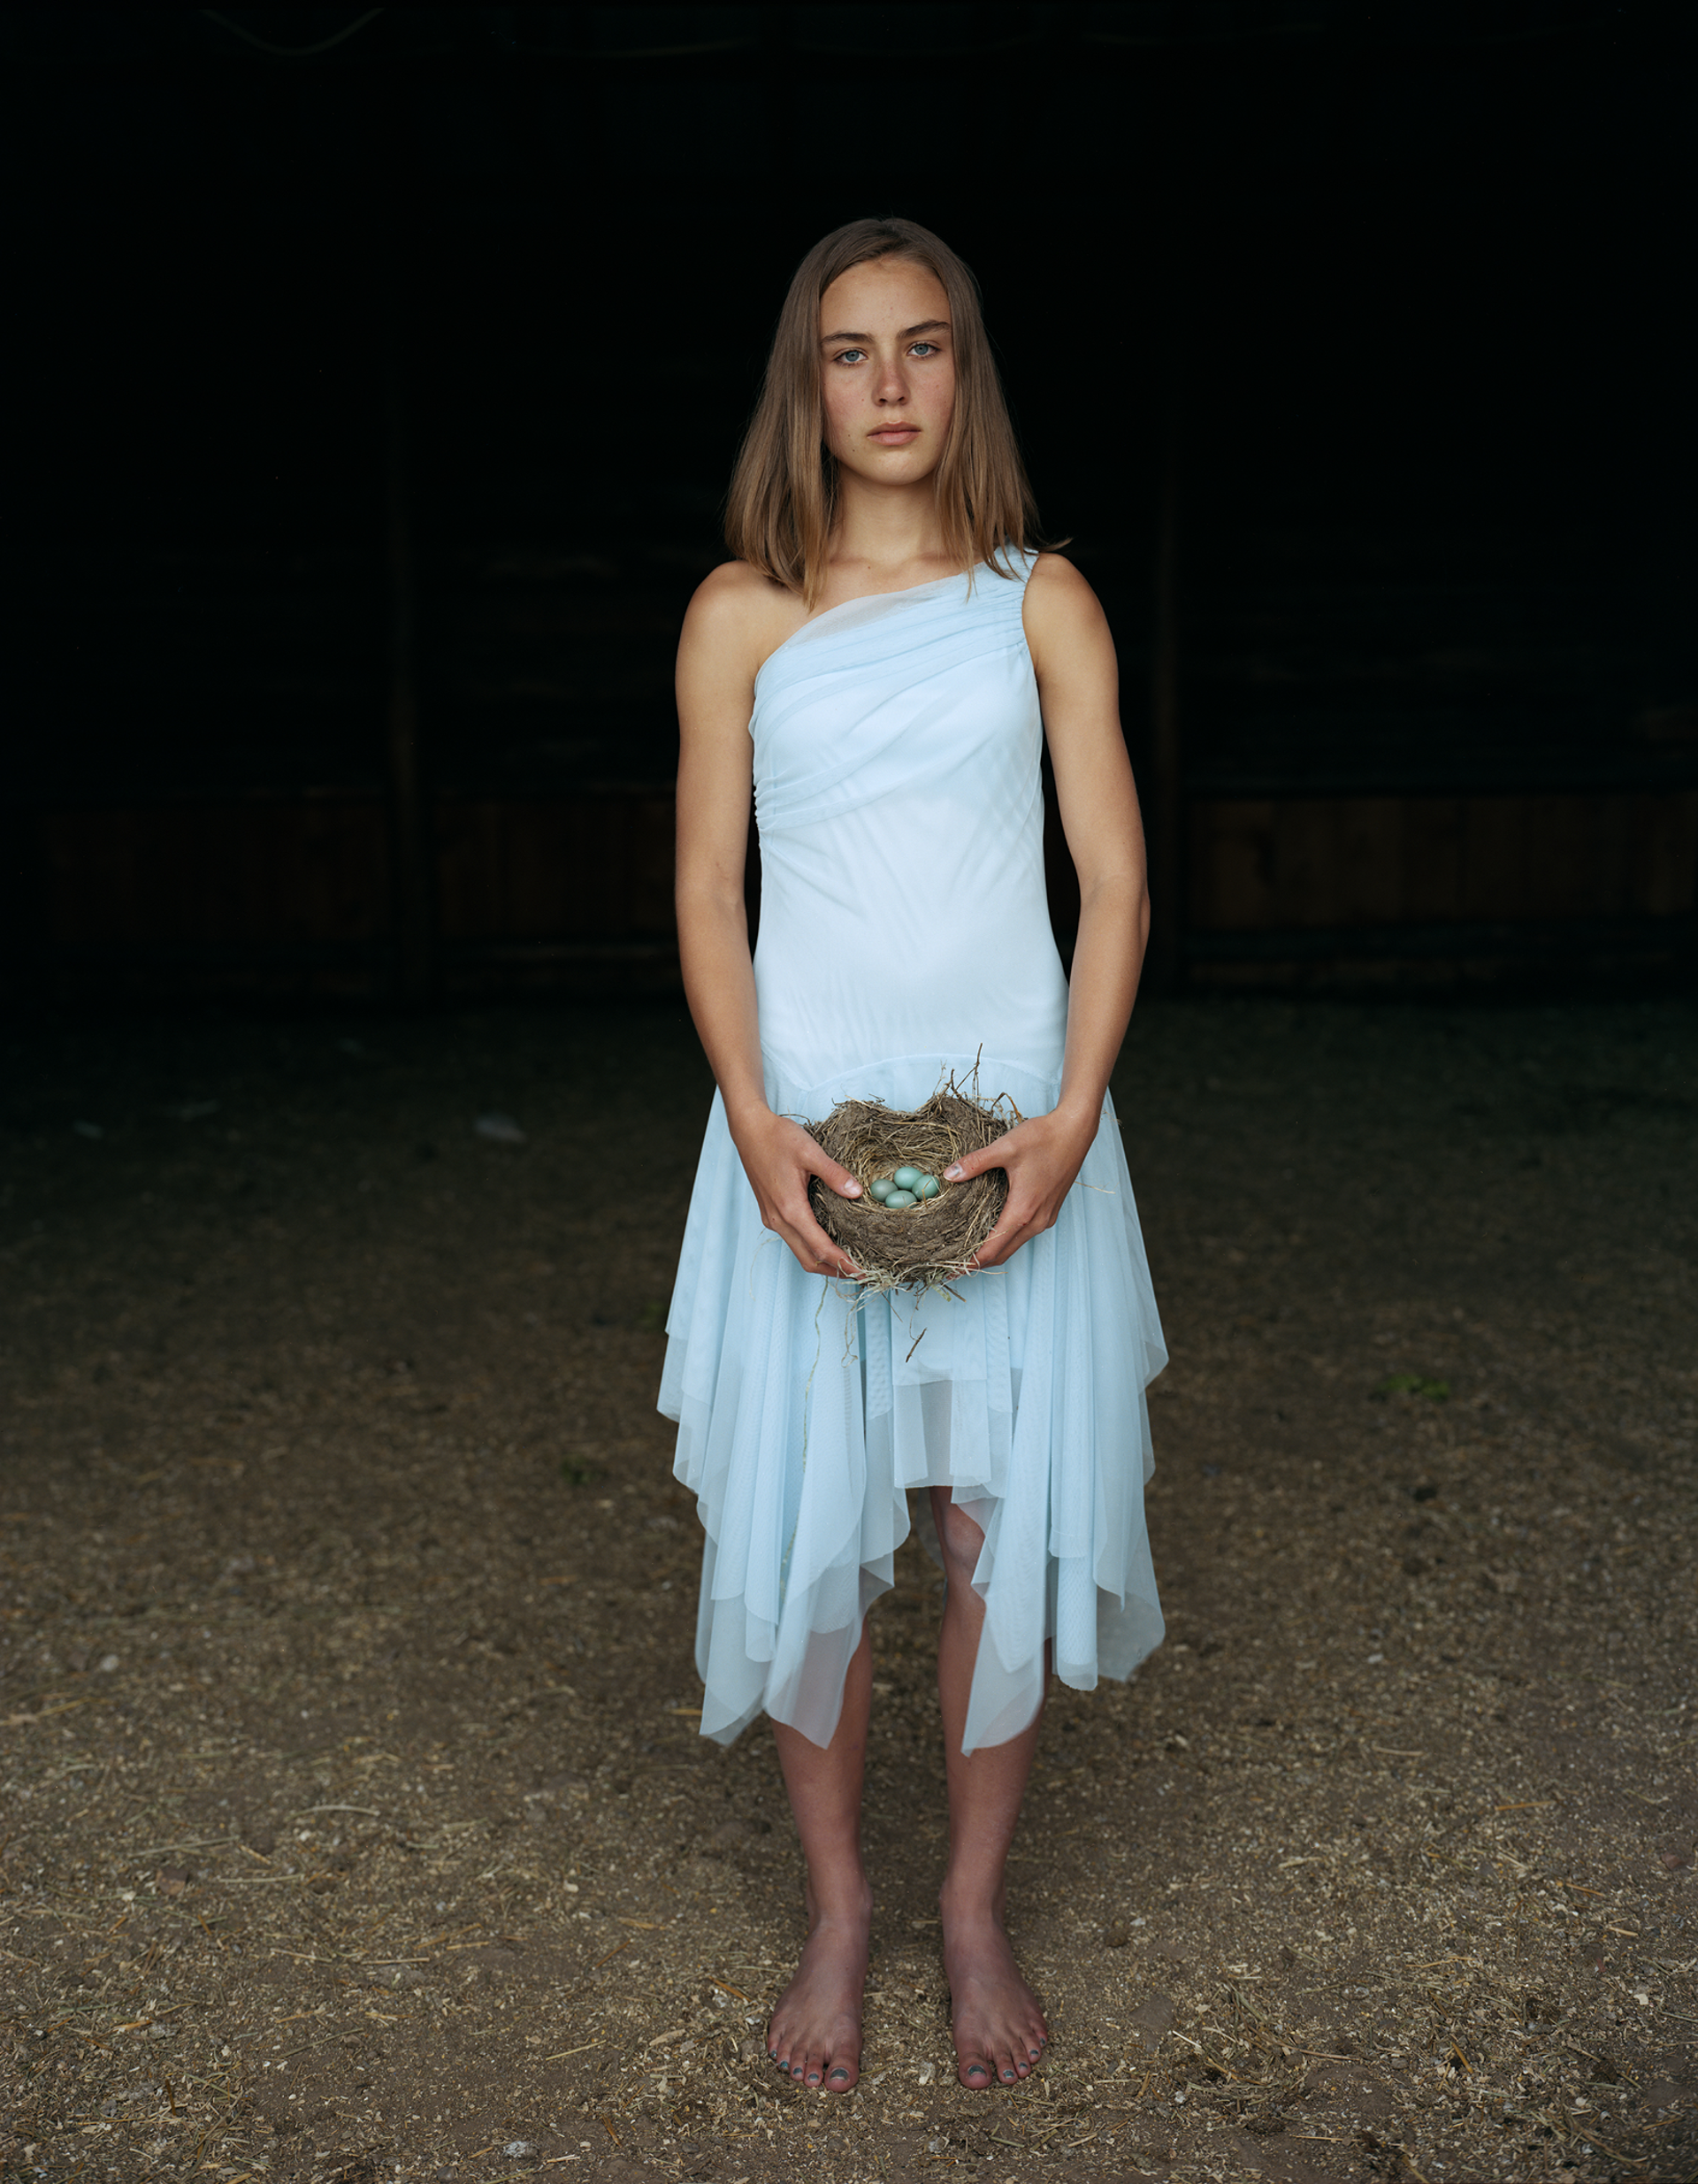 Mattie Holding a Robin's Nest, in Her Eighth Grade Graduation Dress  Laverty Ranch, May 2005, Idaho by Laura McPhee